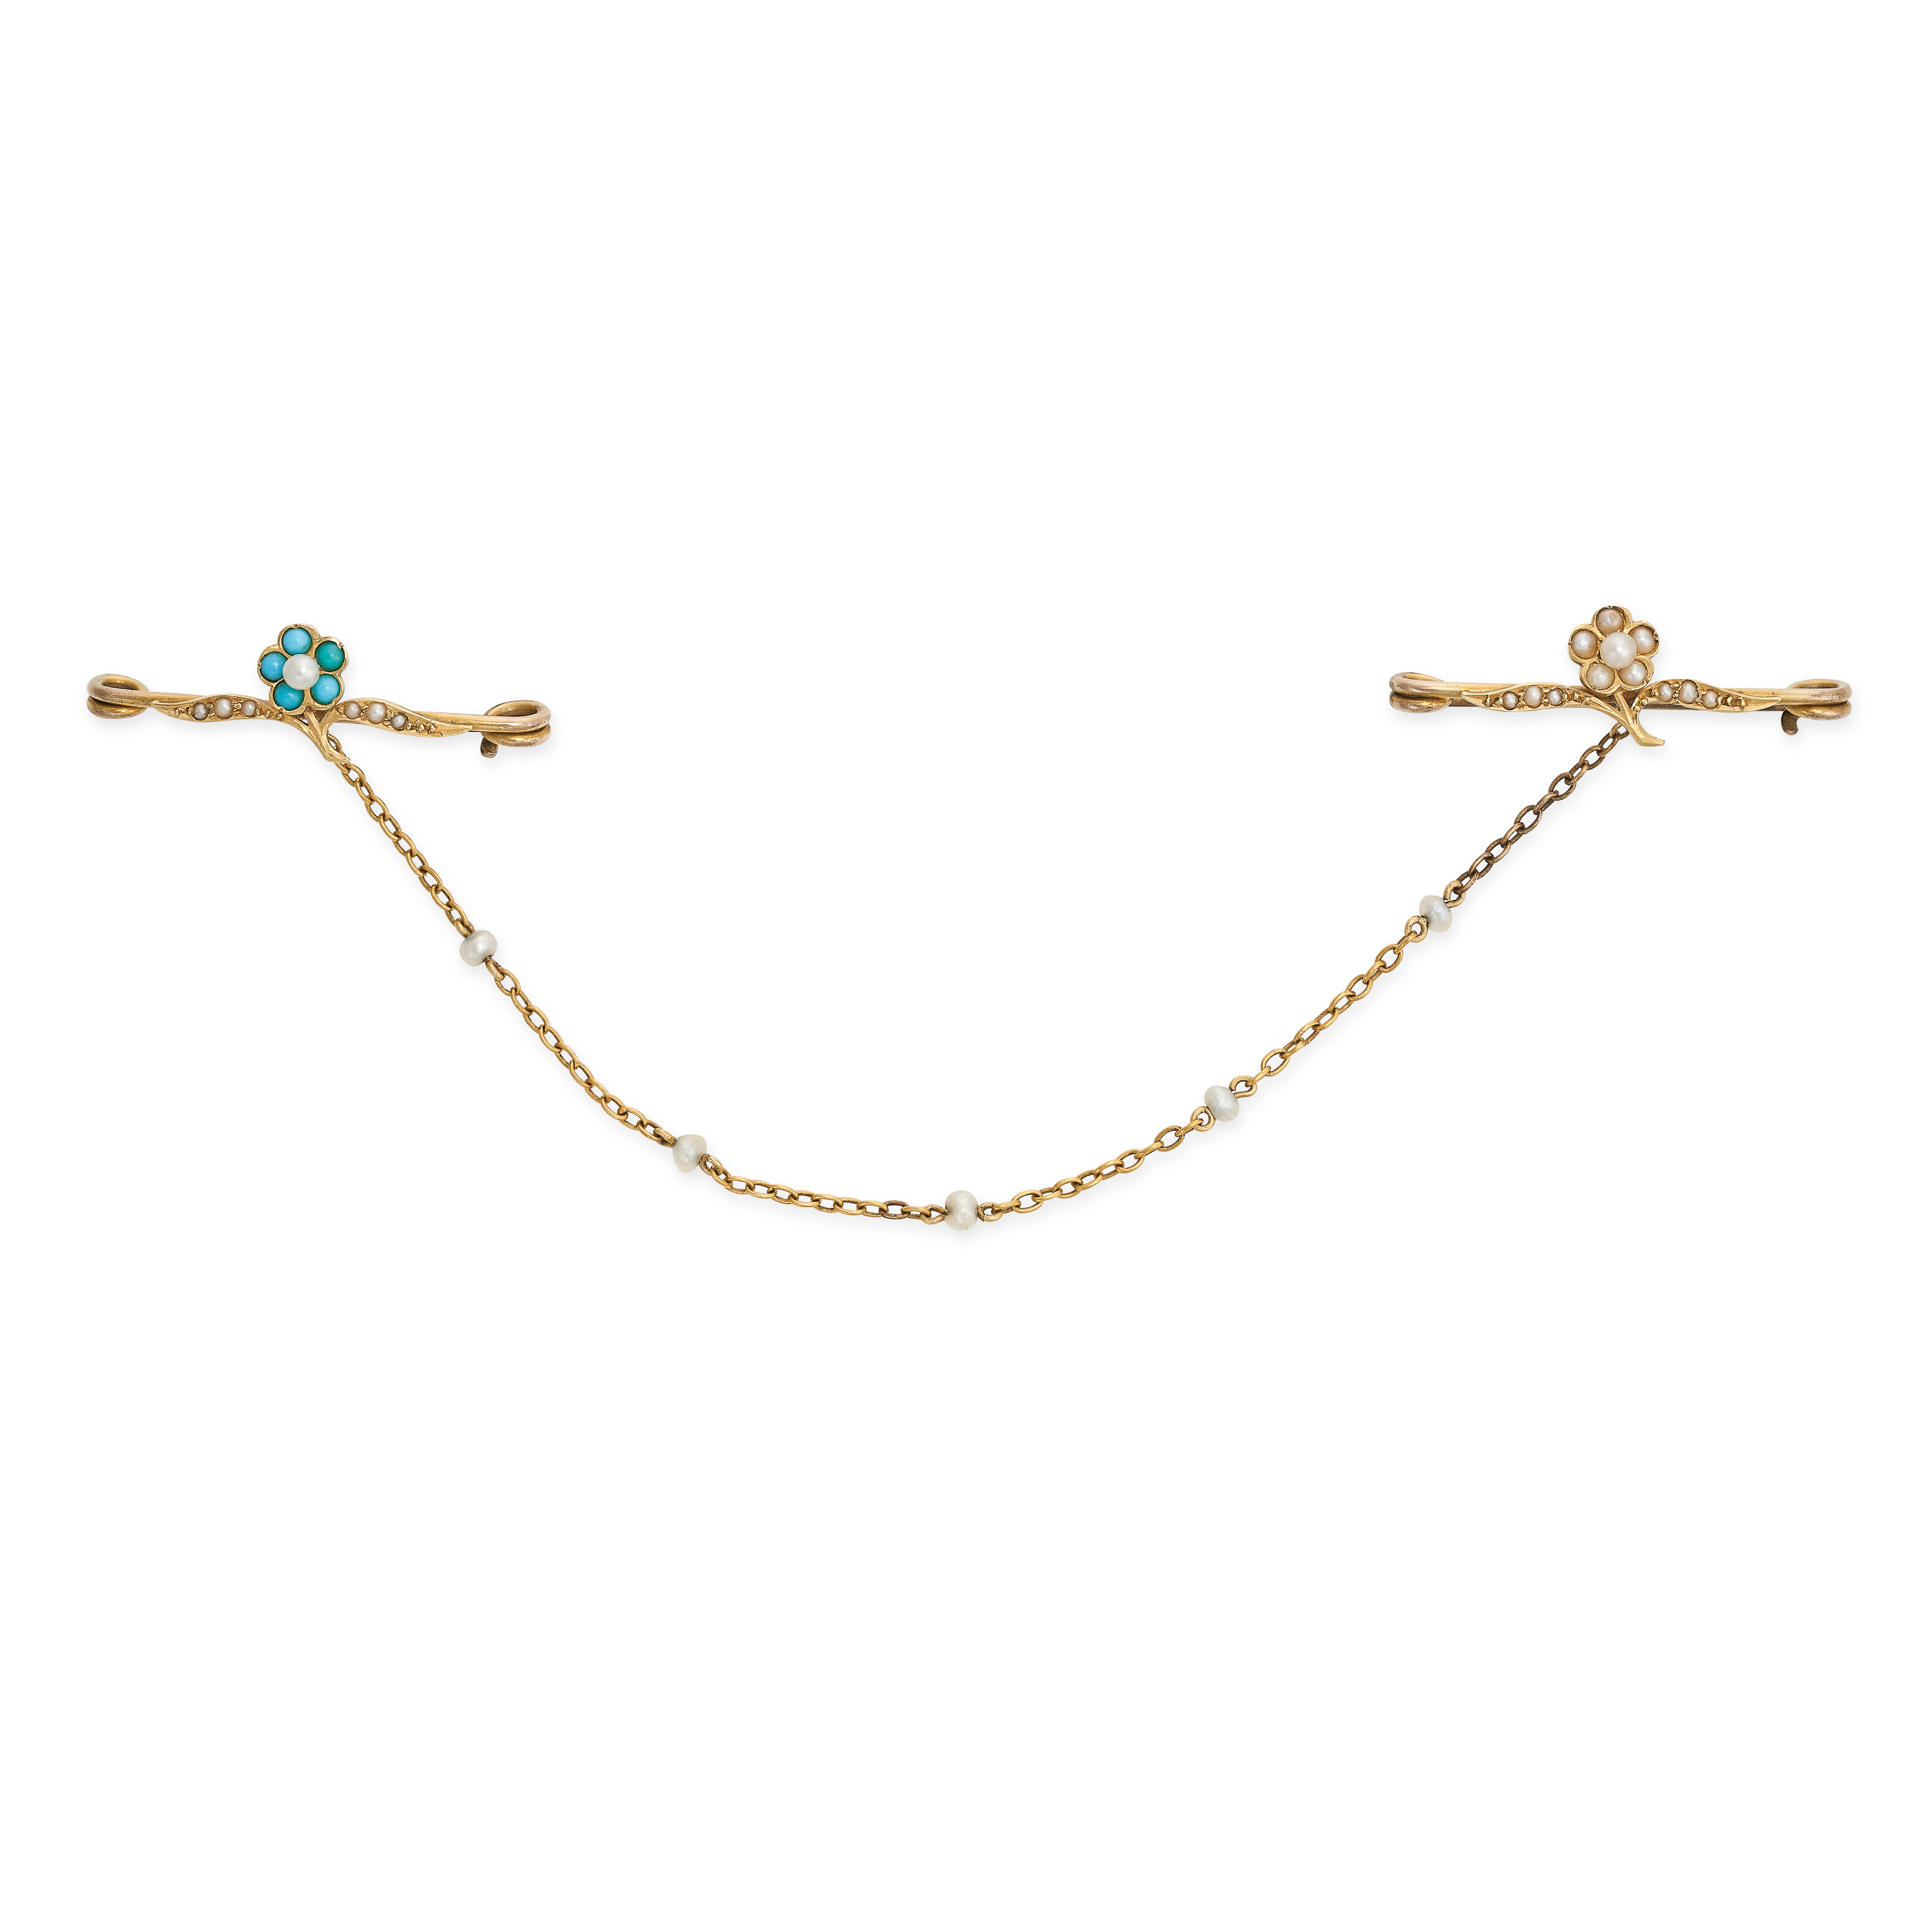 A PAIR OF ANTIQUE PEARL AND TURQUOISE BROOCHES in yellow gold, each designed as a bar brooch set